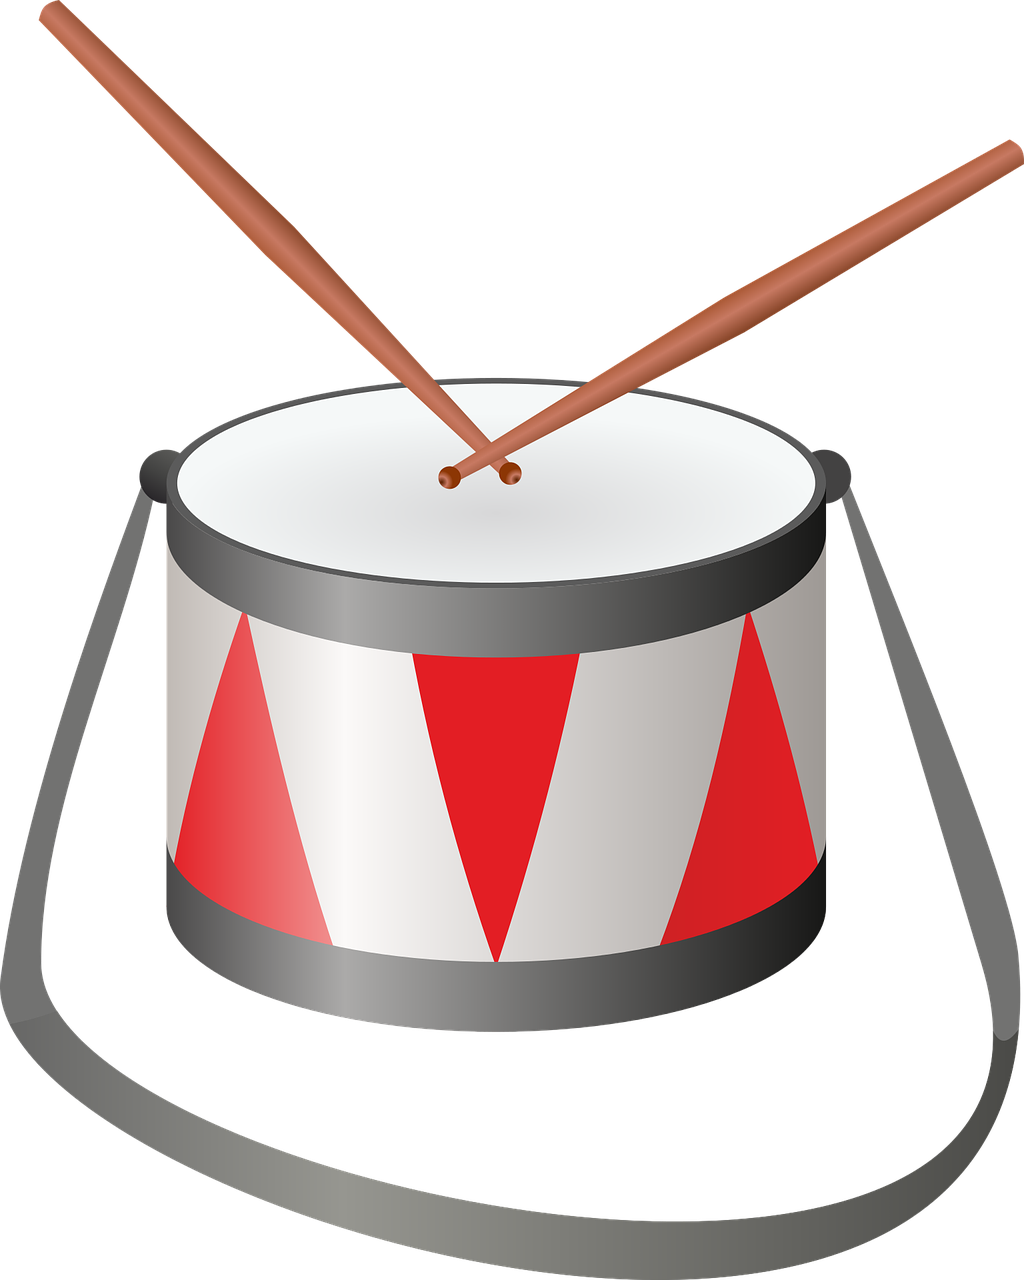 a drum with two sticks sticking out of it, a digital rendering, inspired by Masamitsu Ōta, pop art, red white and black color scheme, basic, nighttime!, beginner